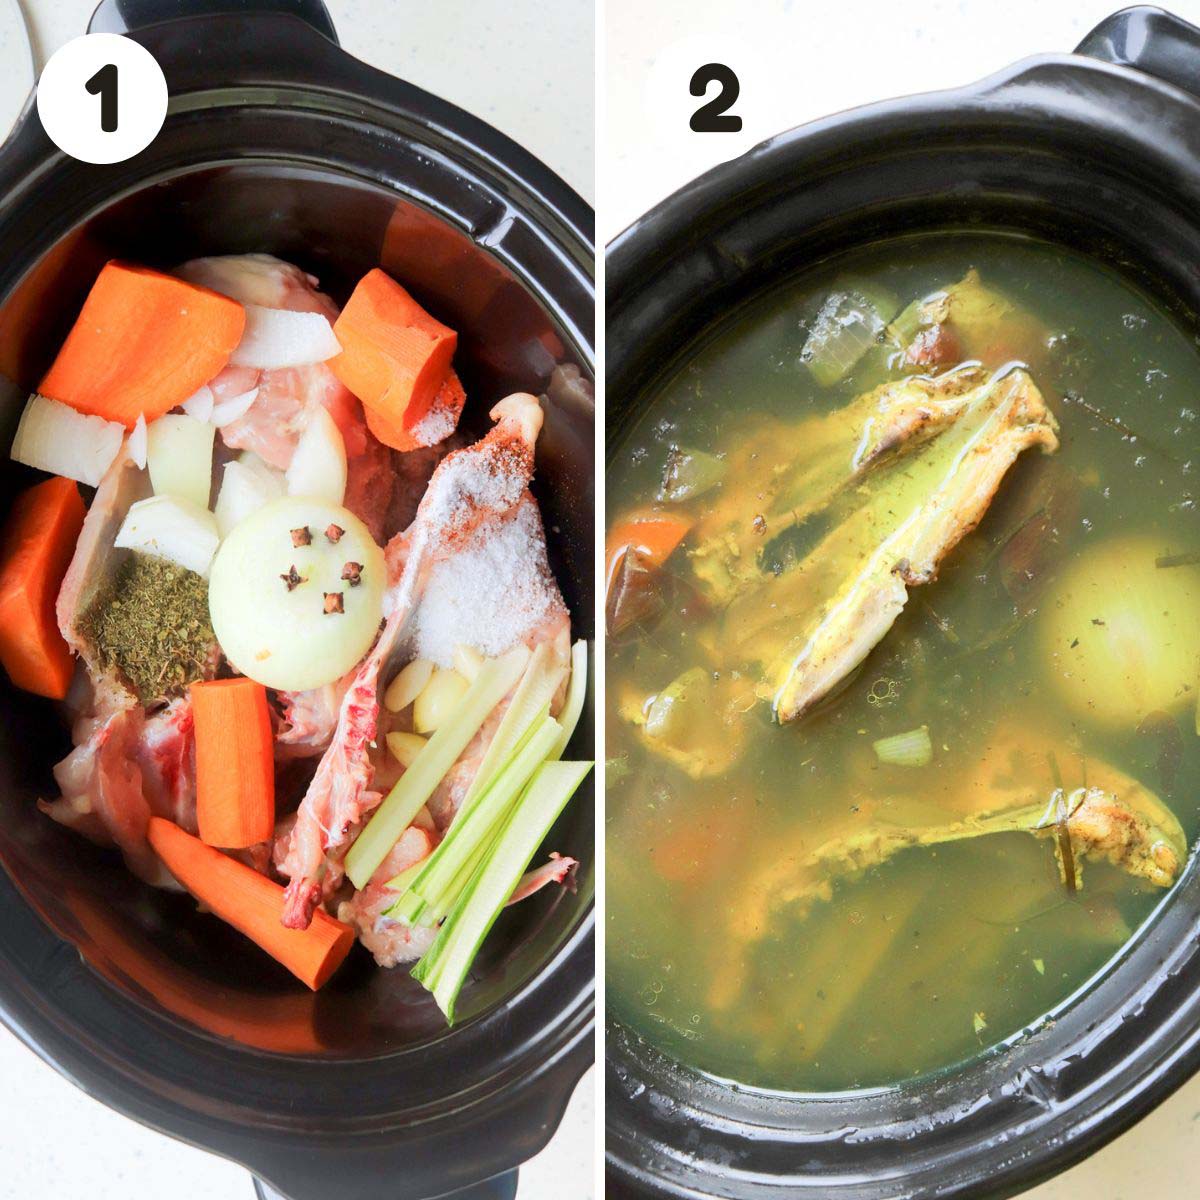 Steps to make the chicken stock.